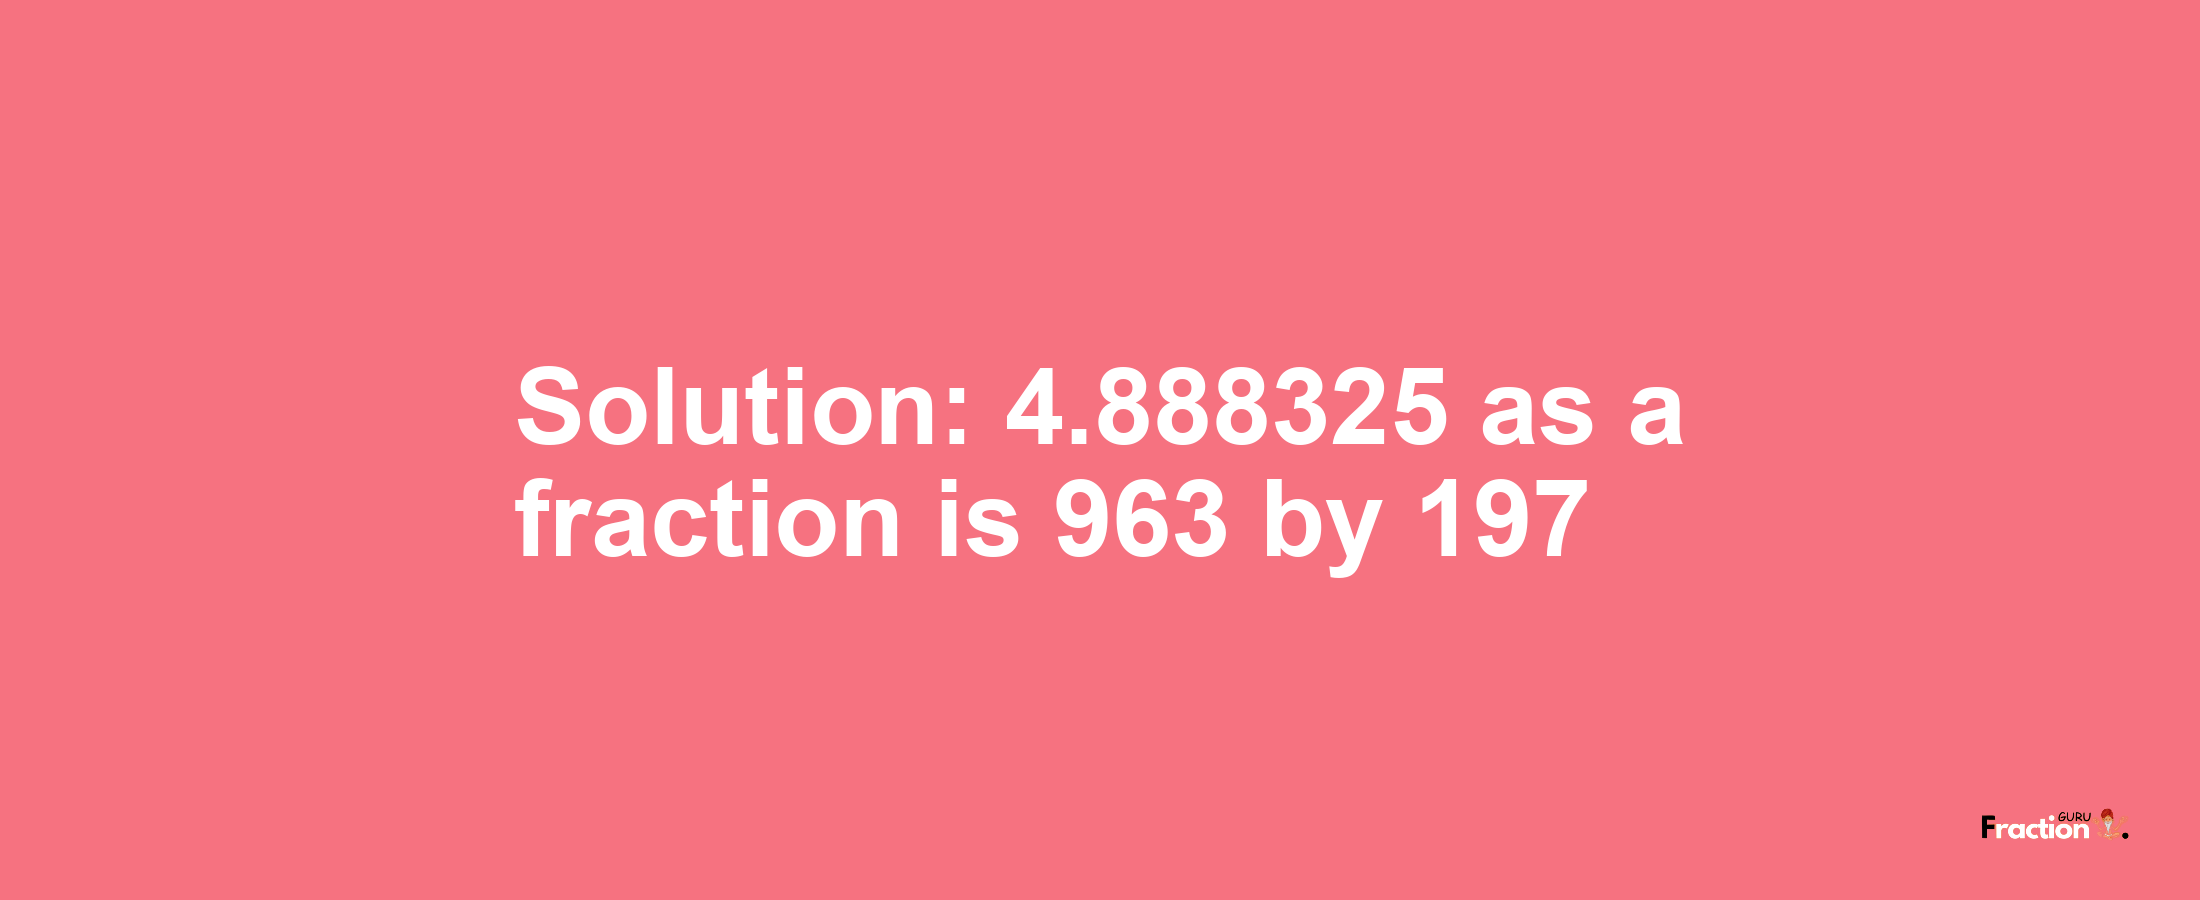 Solution:4.888325 as a fraction is 963/197